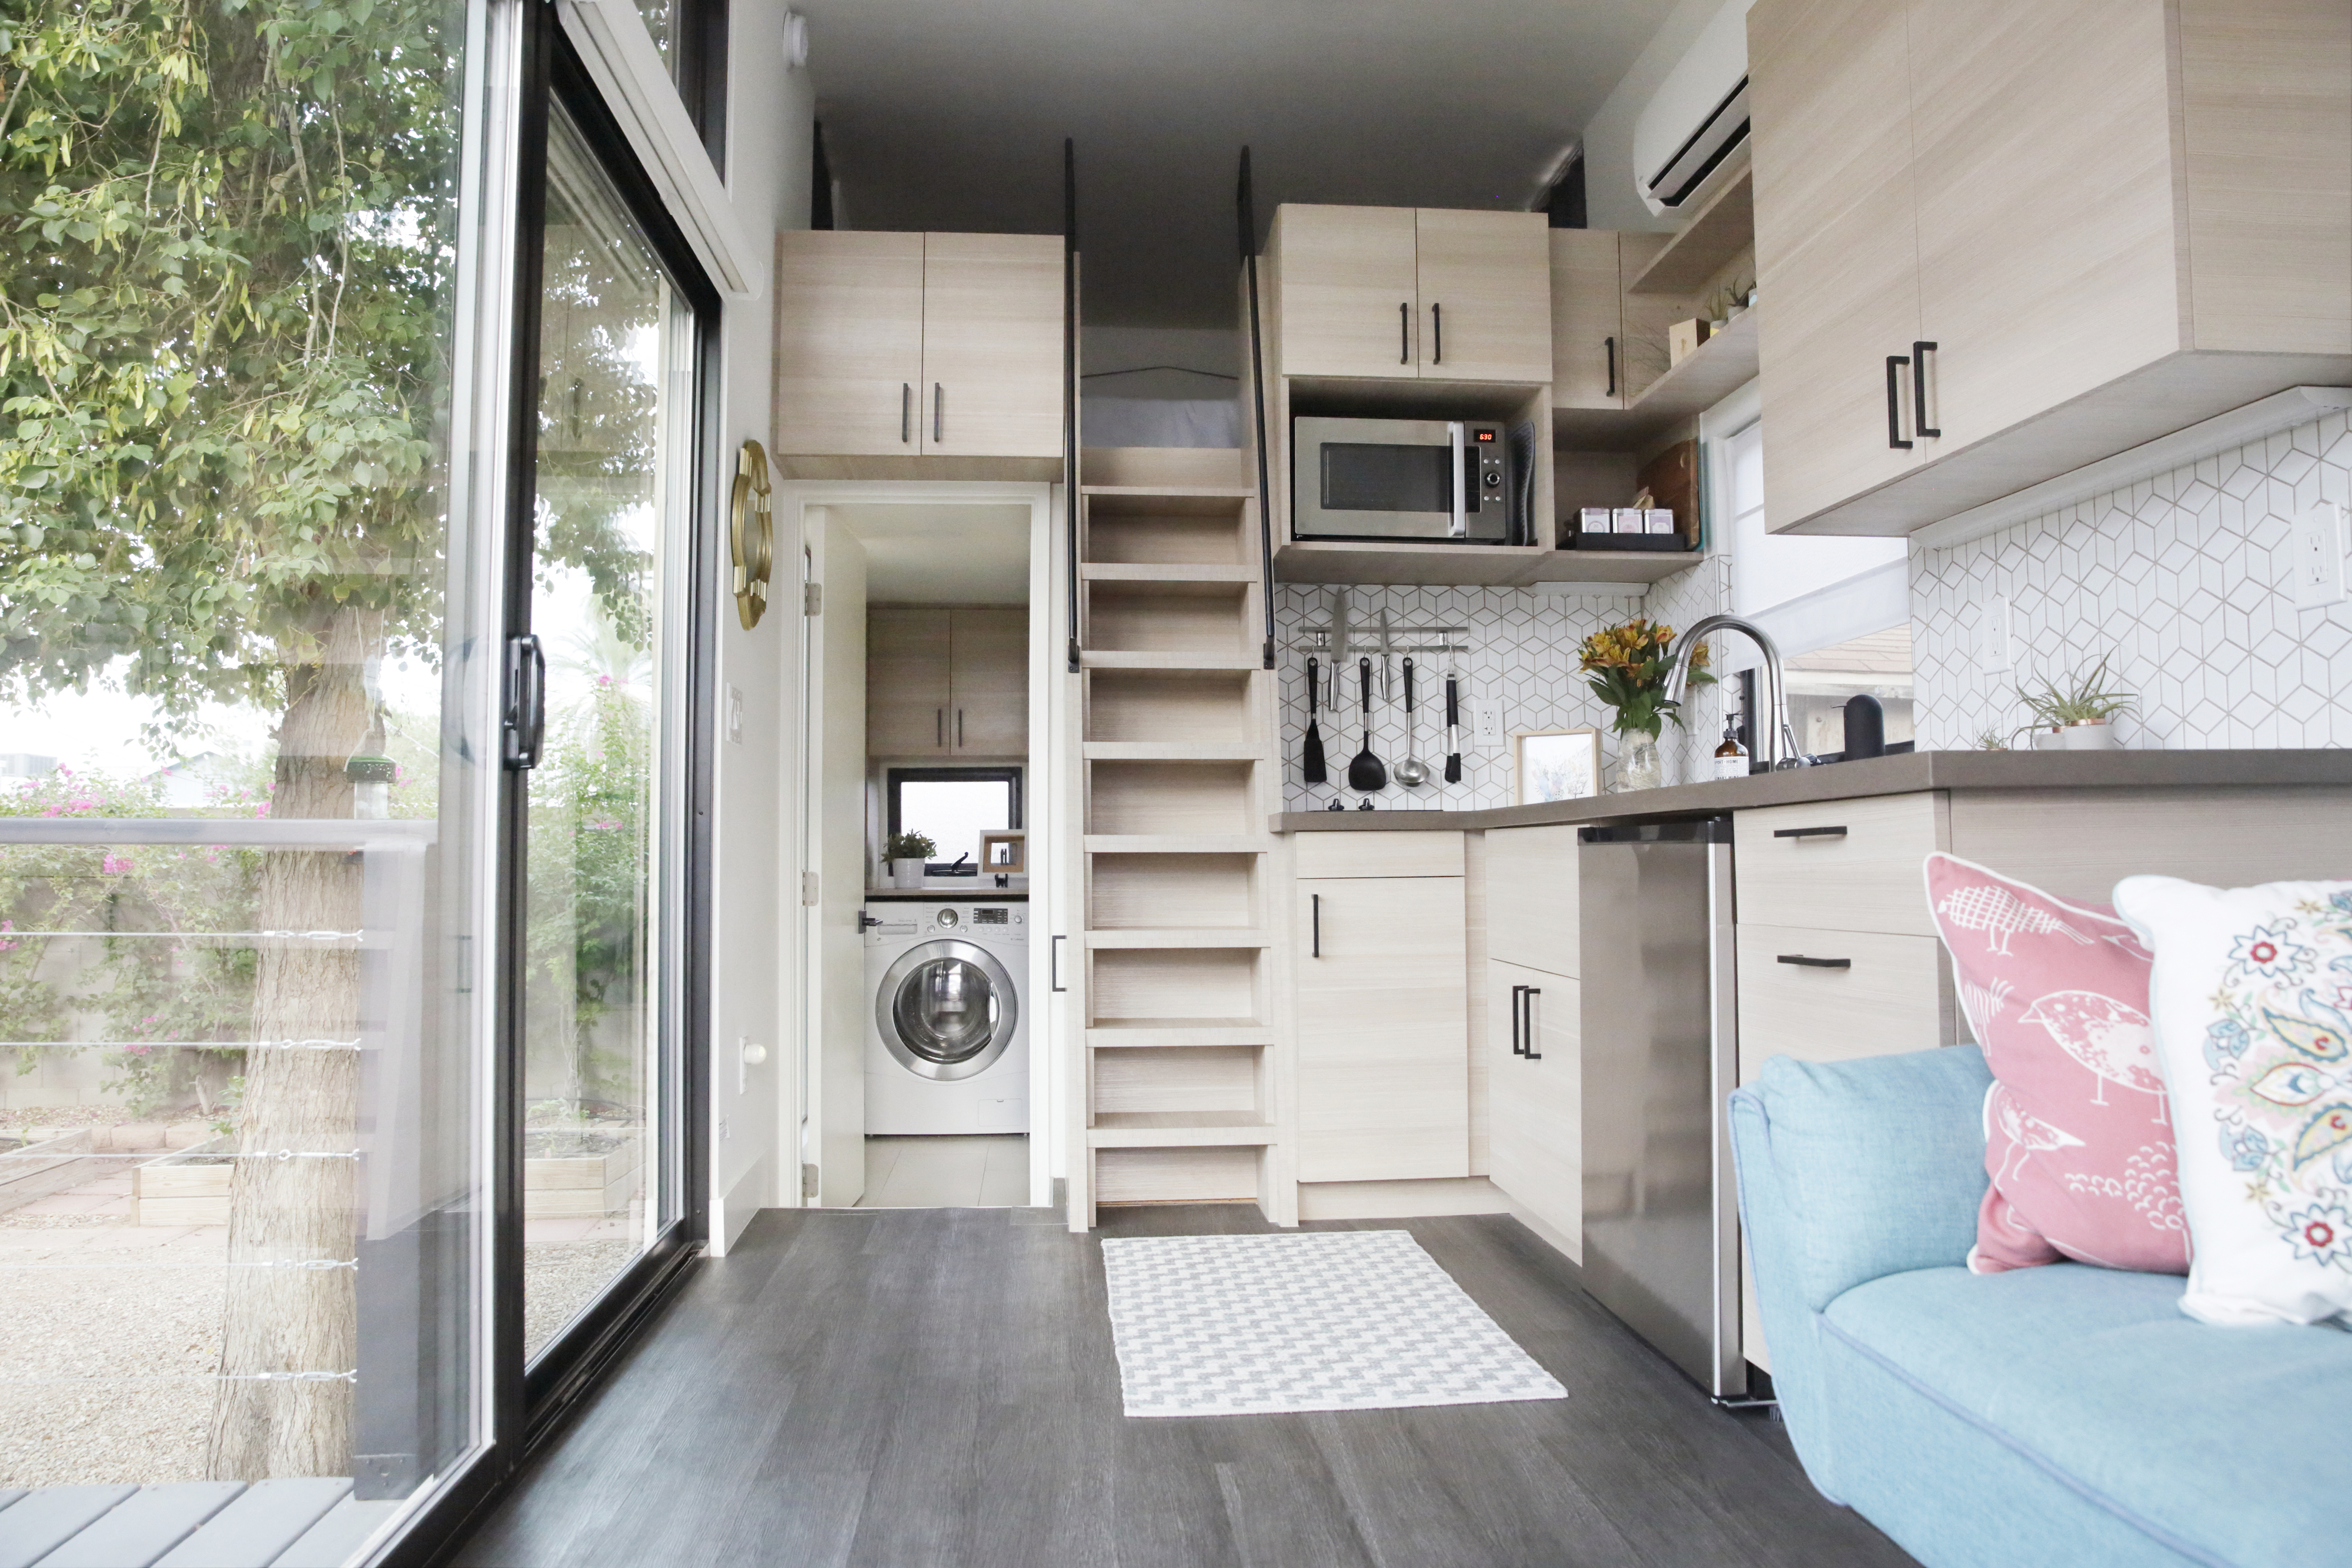 Two-level tiny home interior with kitchen, staircase, and seating area with a gray floor